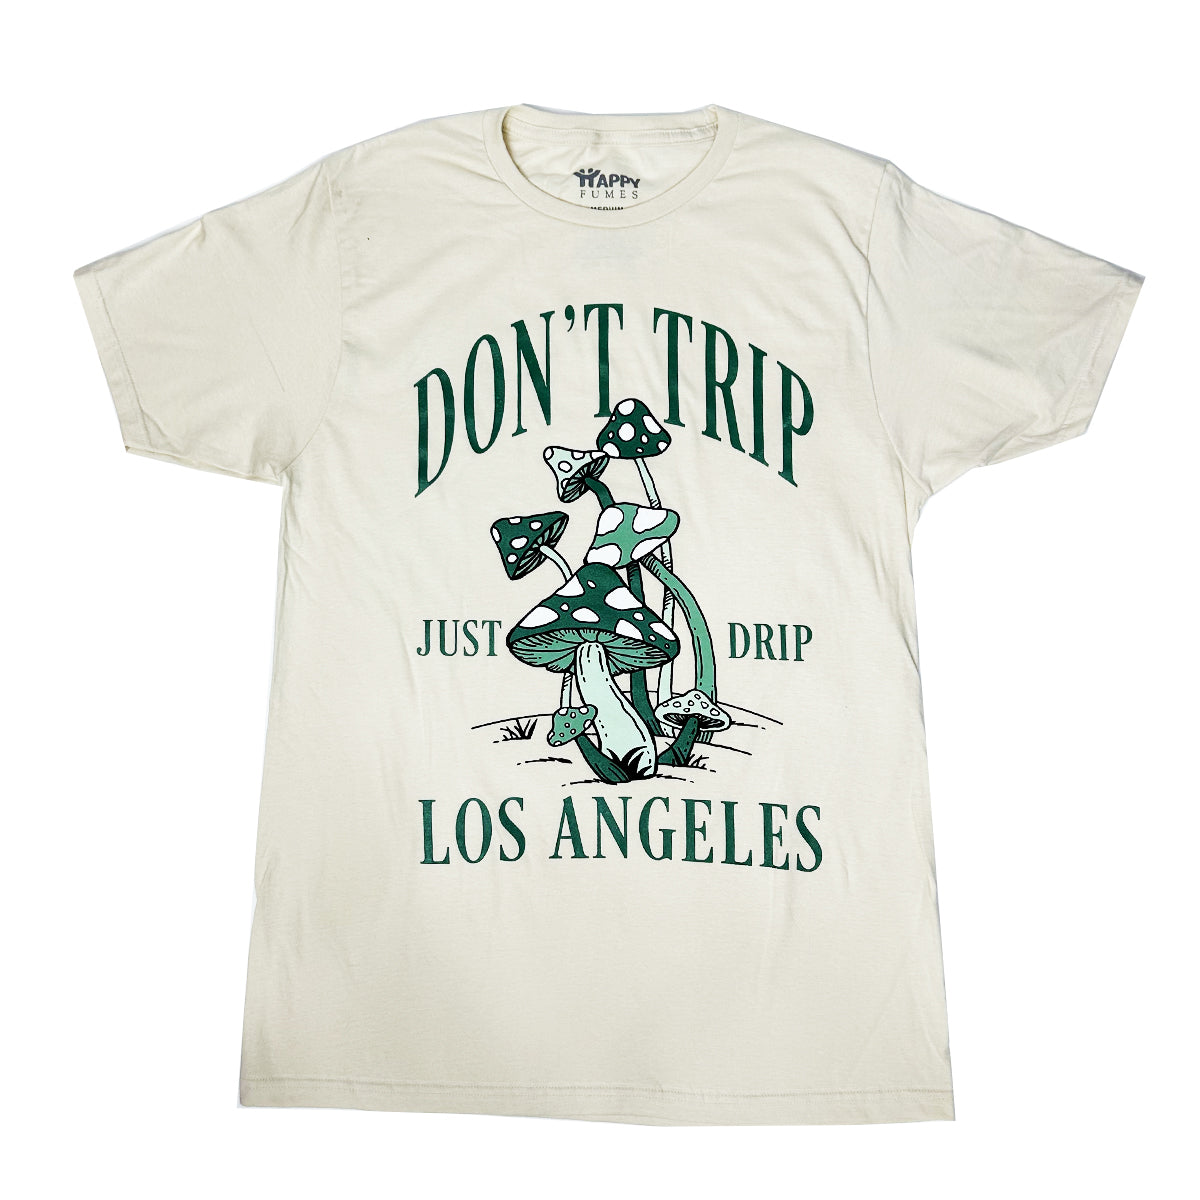 Don't Trip Short Sleeve - Pack of 6 Units  1S, 2M, 2L, 1XL